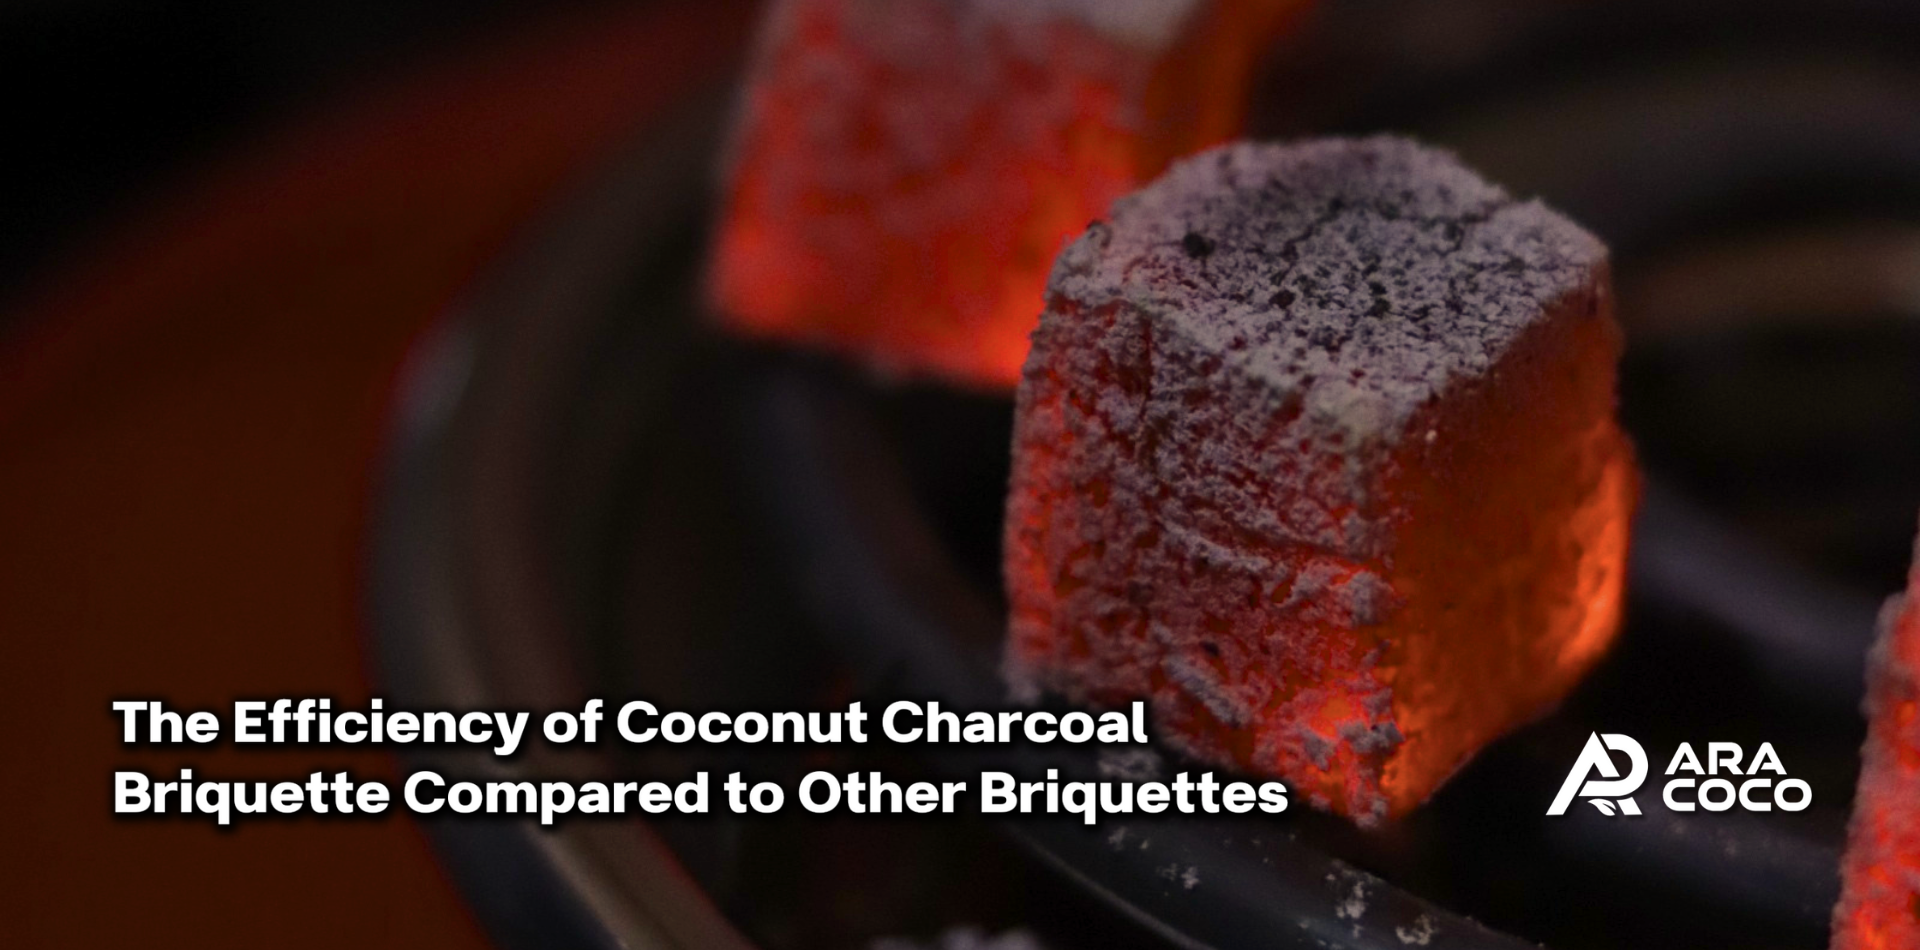 The Efficiency of Coconut Charcoal Briquette Compared to Other Briquettes